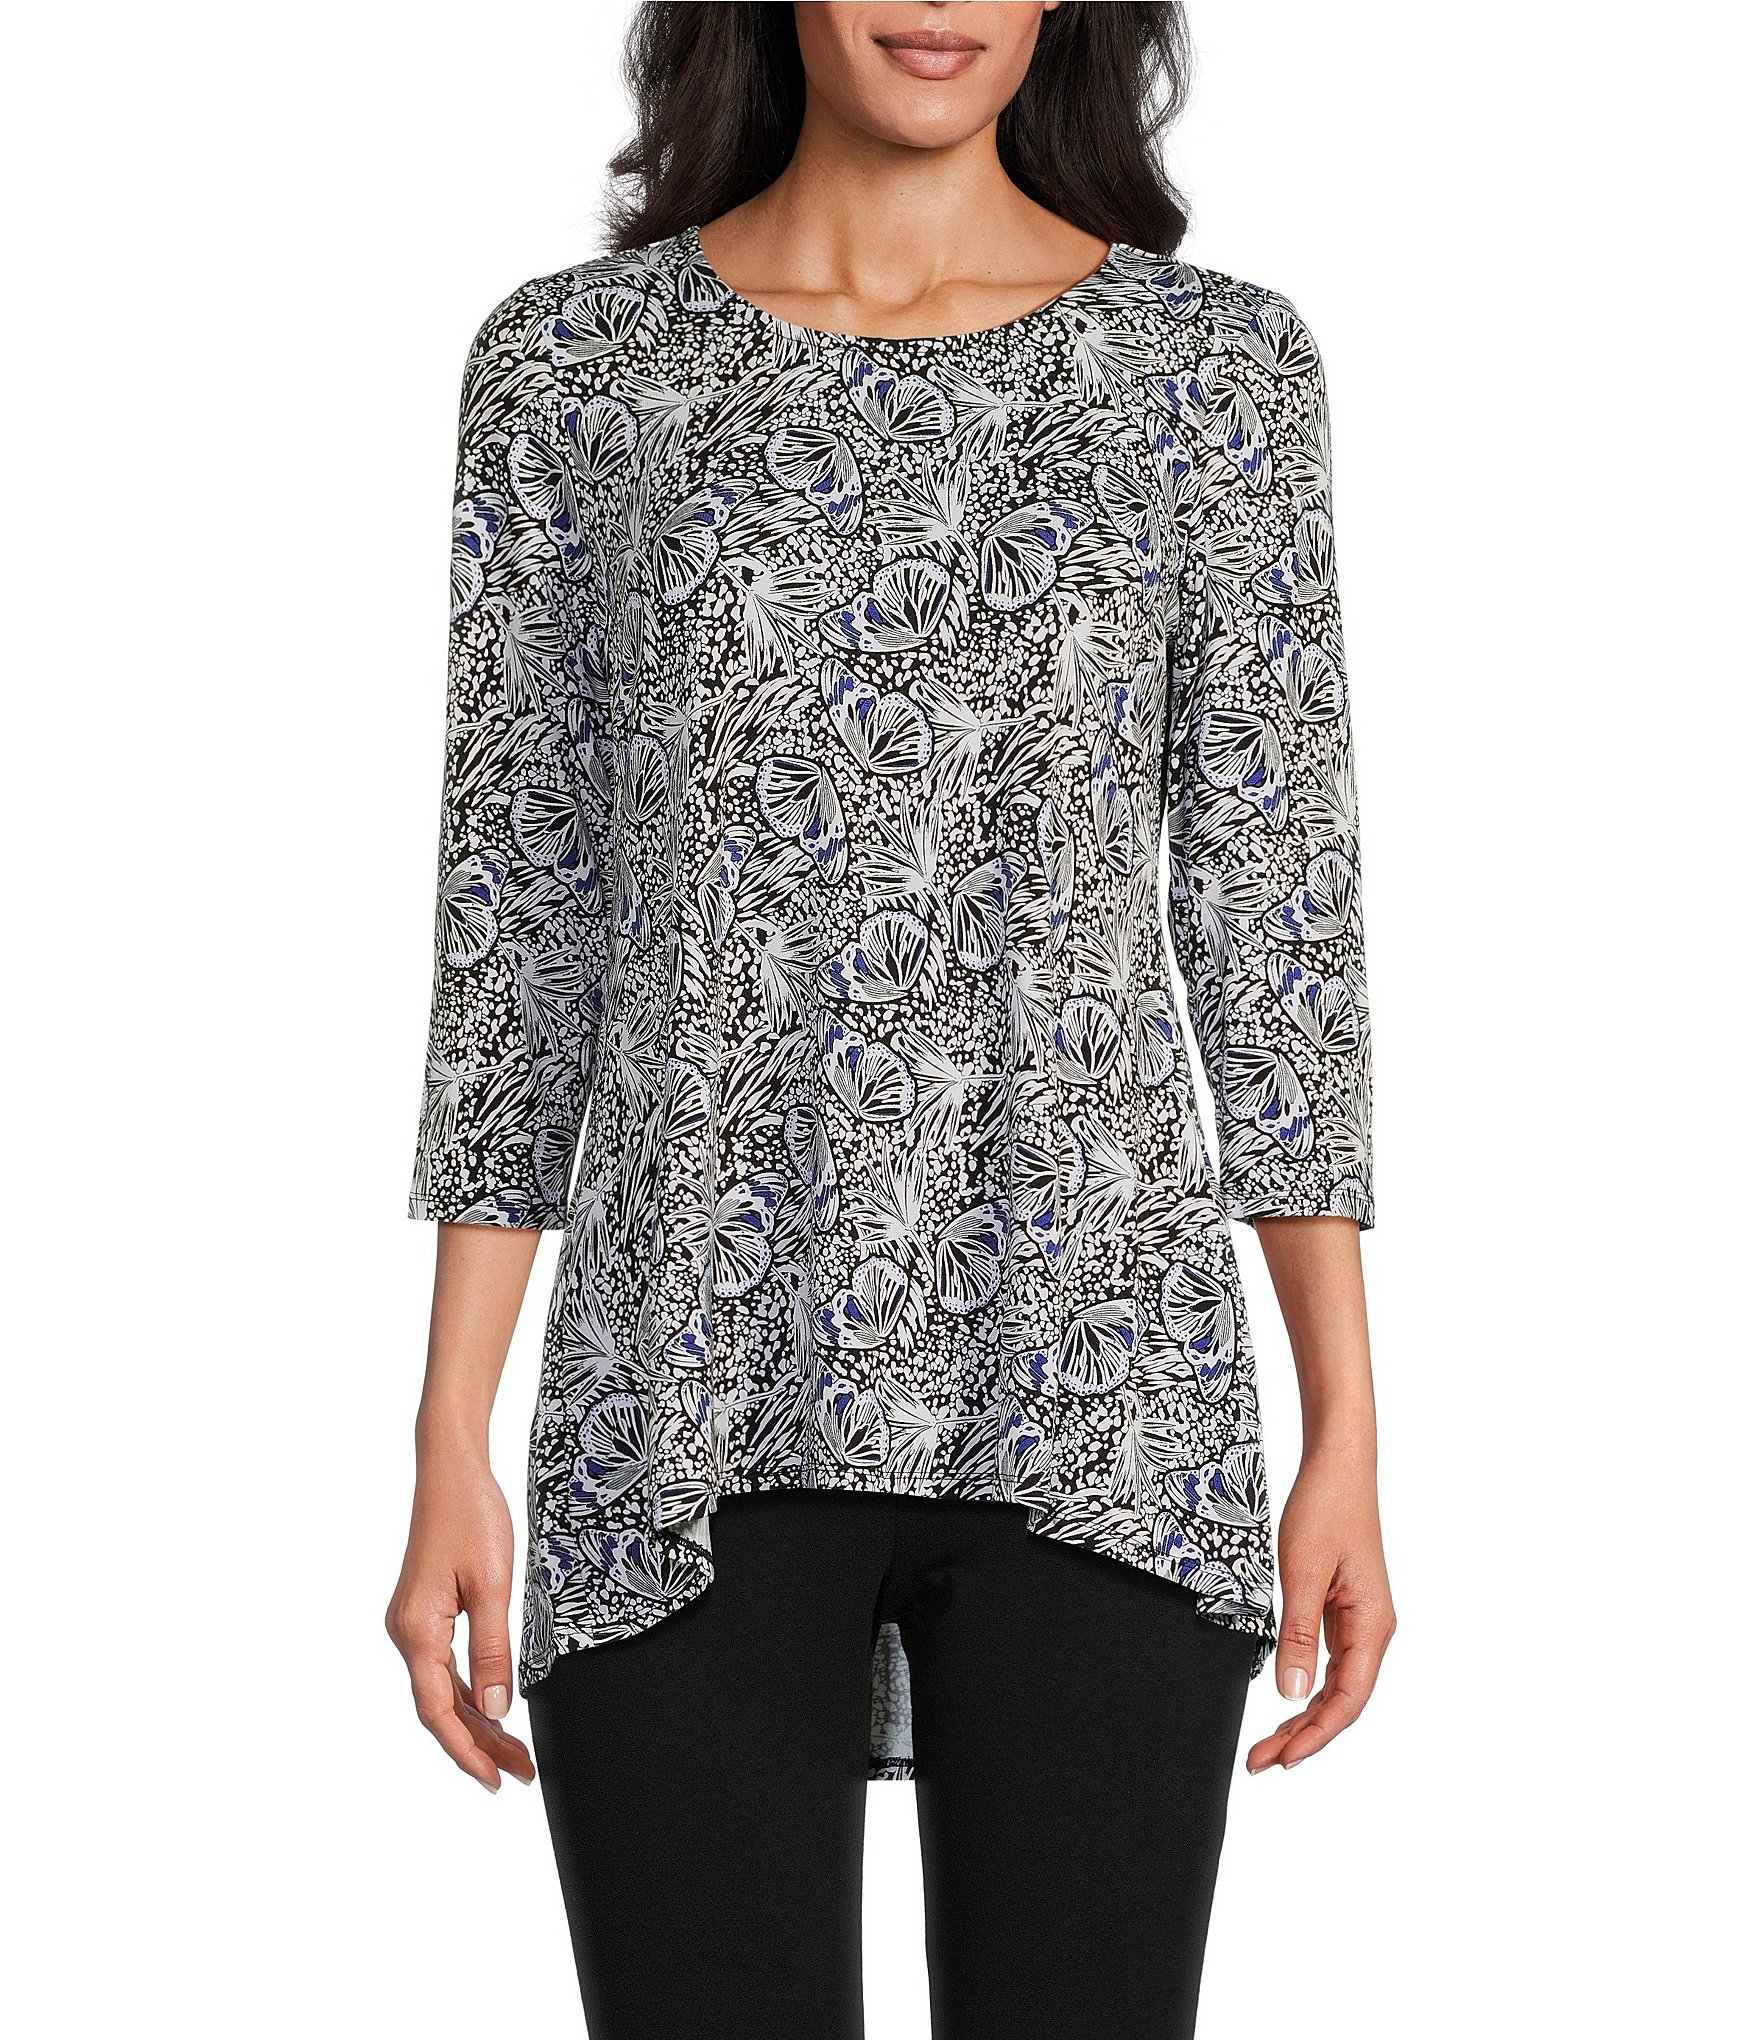 Jm Collection Women's Printed 3/4 Sleeve Scoop-Neck Top, Created